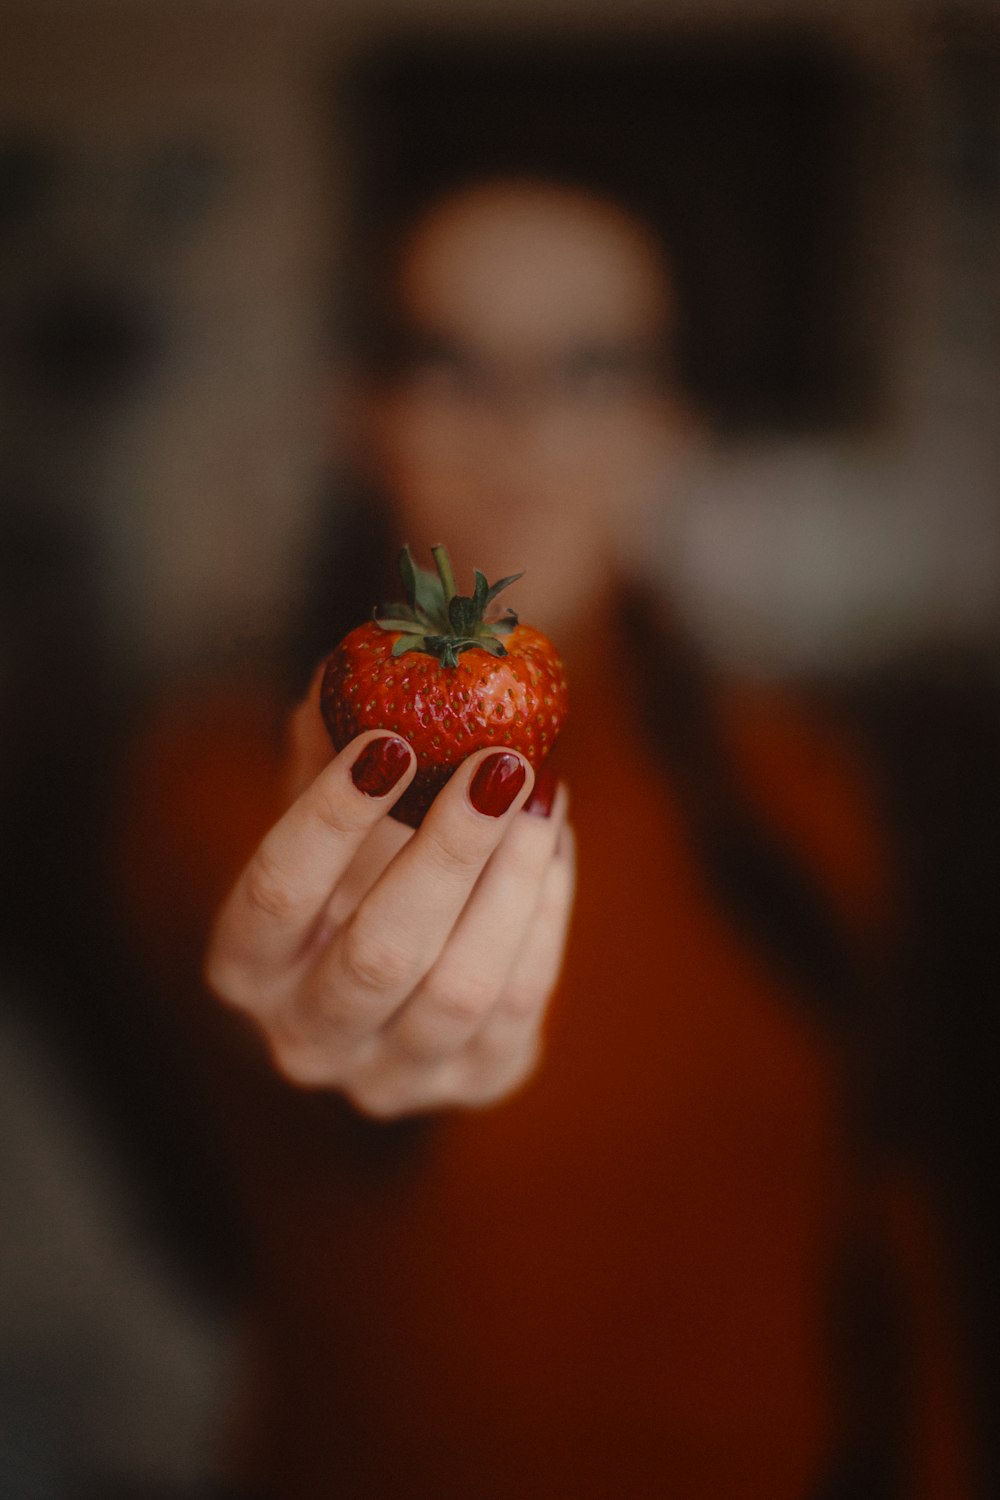 a person holding a strawberry